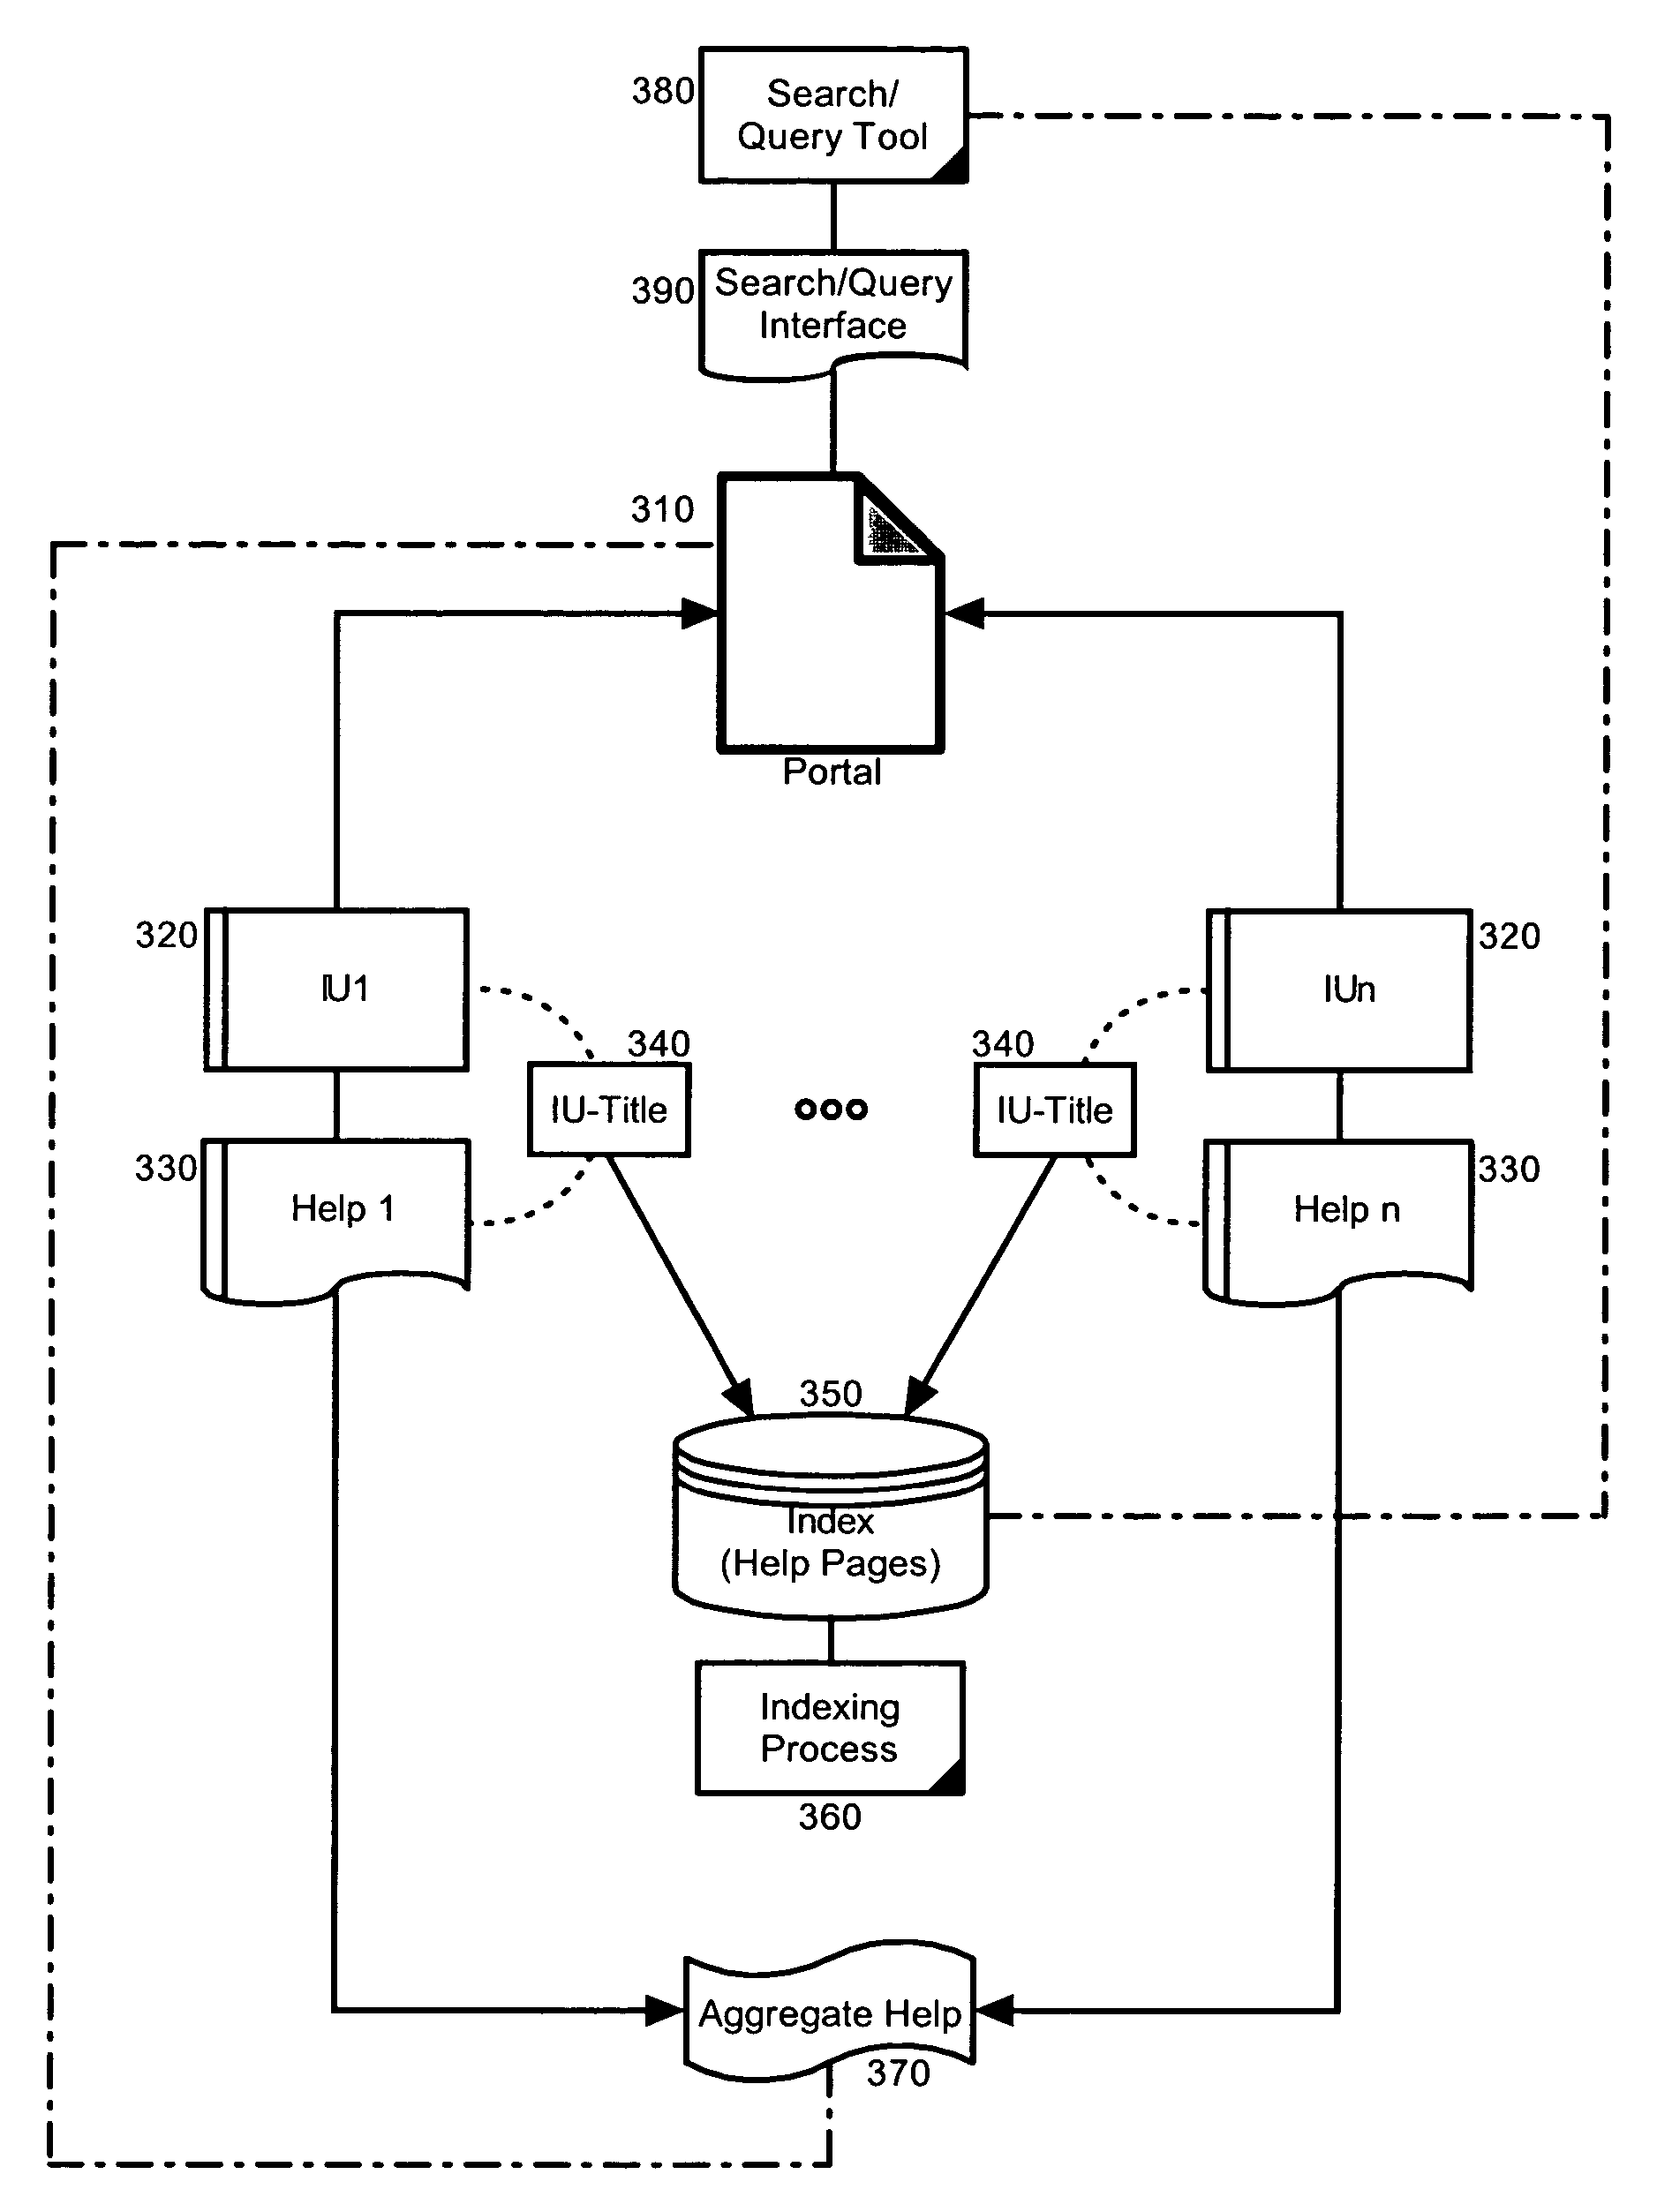 Search and query operations in a dynamic composition of help information for an aggregation of applications